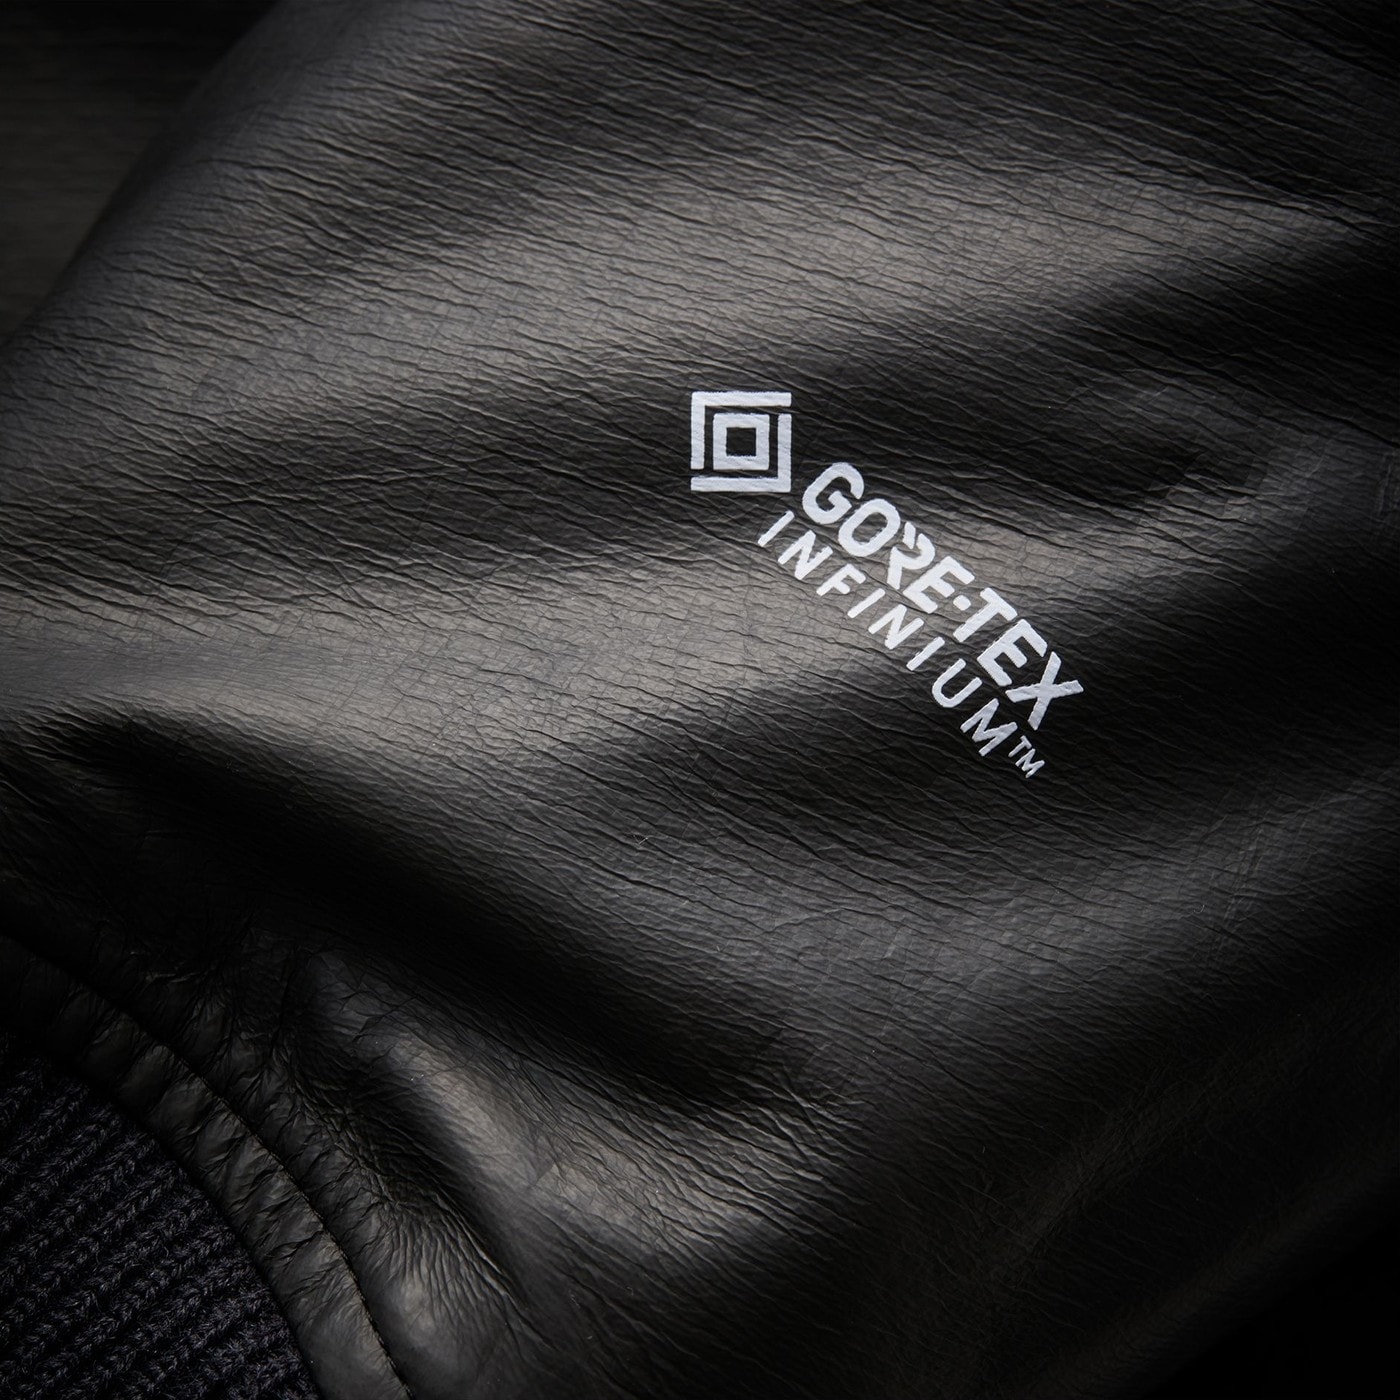 The North Face Japan 推出全新 GORE-TEX 面料夾克系列